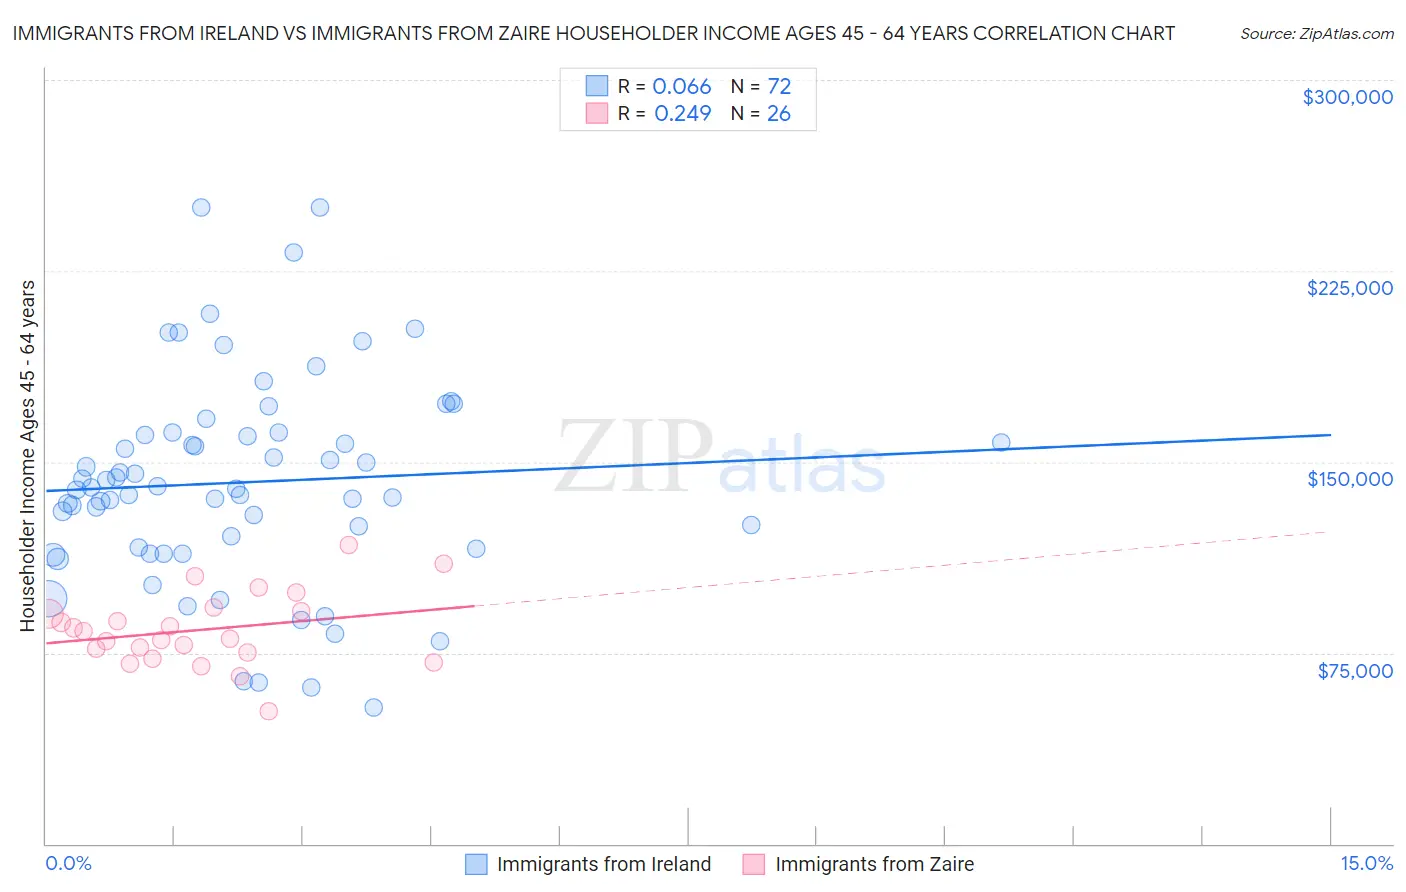 Immigrants from Ireland vs Immigrants from Zaire Householder Income Ages 45 - 64 years